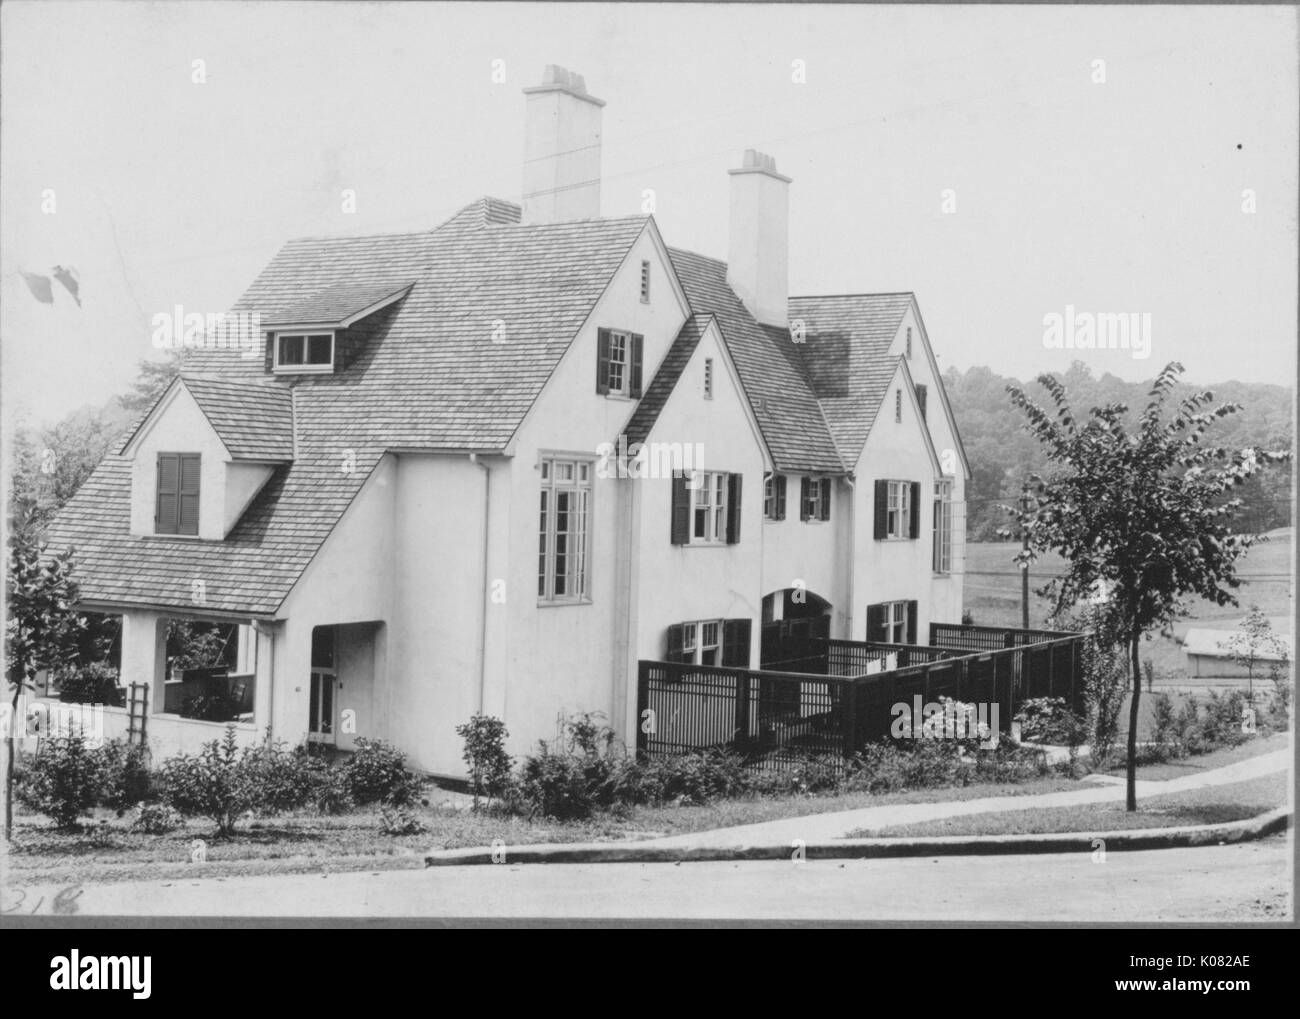 Angled side view of home on quiet street, part of home covered by fence, front porch visible from angle, house surrounded by vegetation such as bushes and trees, two chimneys coming out of top of house, windows with dark panels, house next to concrete sidewalk and street, Baltimore, Maryland, 1910. This image is from a series documenting the construction and sale of homes in the Roland Park/Guilford neighborhood of Baltimore, a streetcar suburb and one of the first planned communities in the United States. Stock Photo